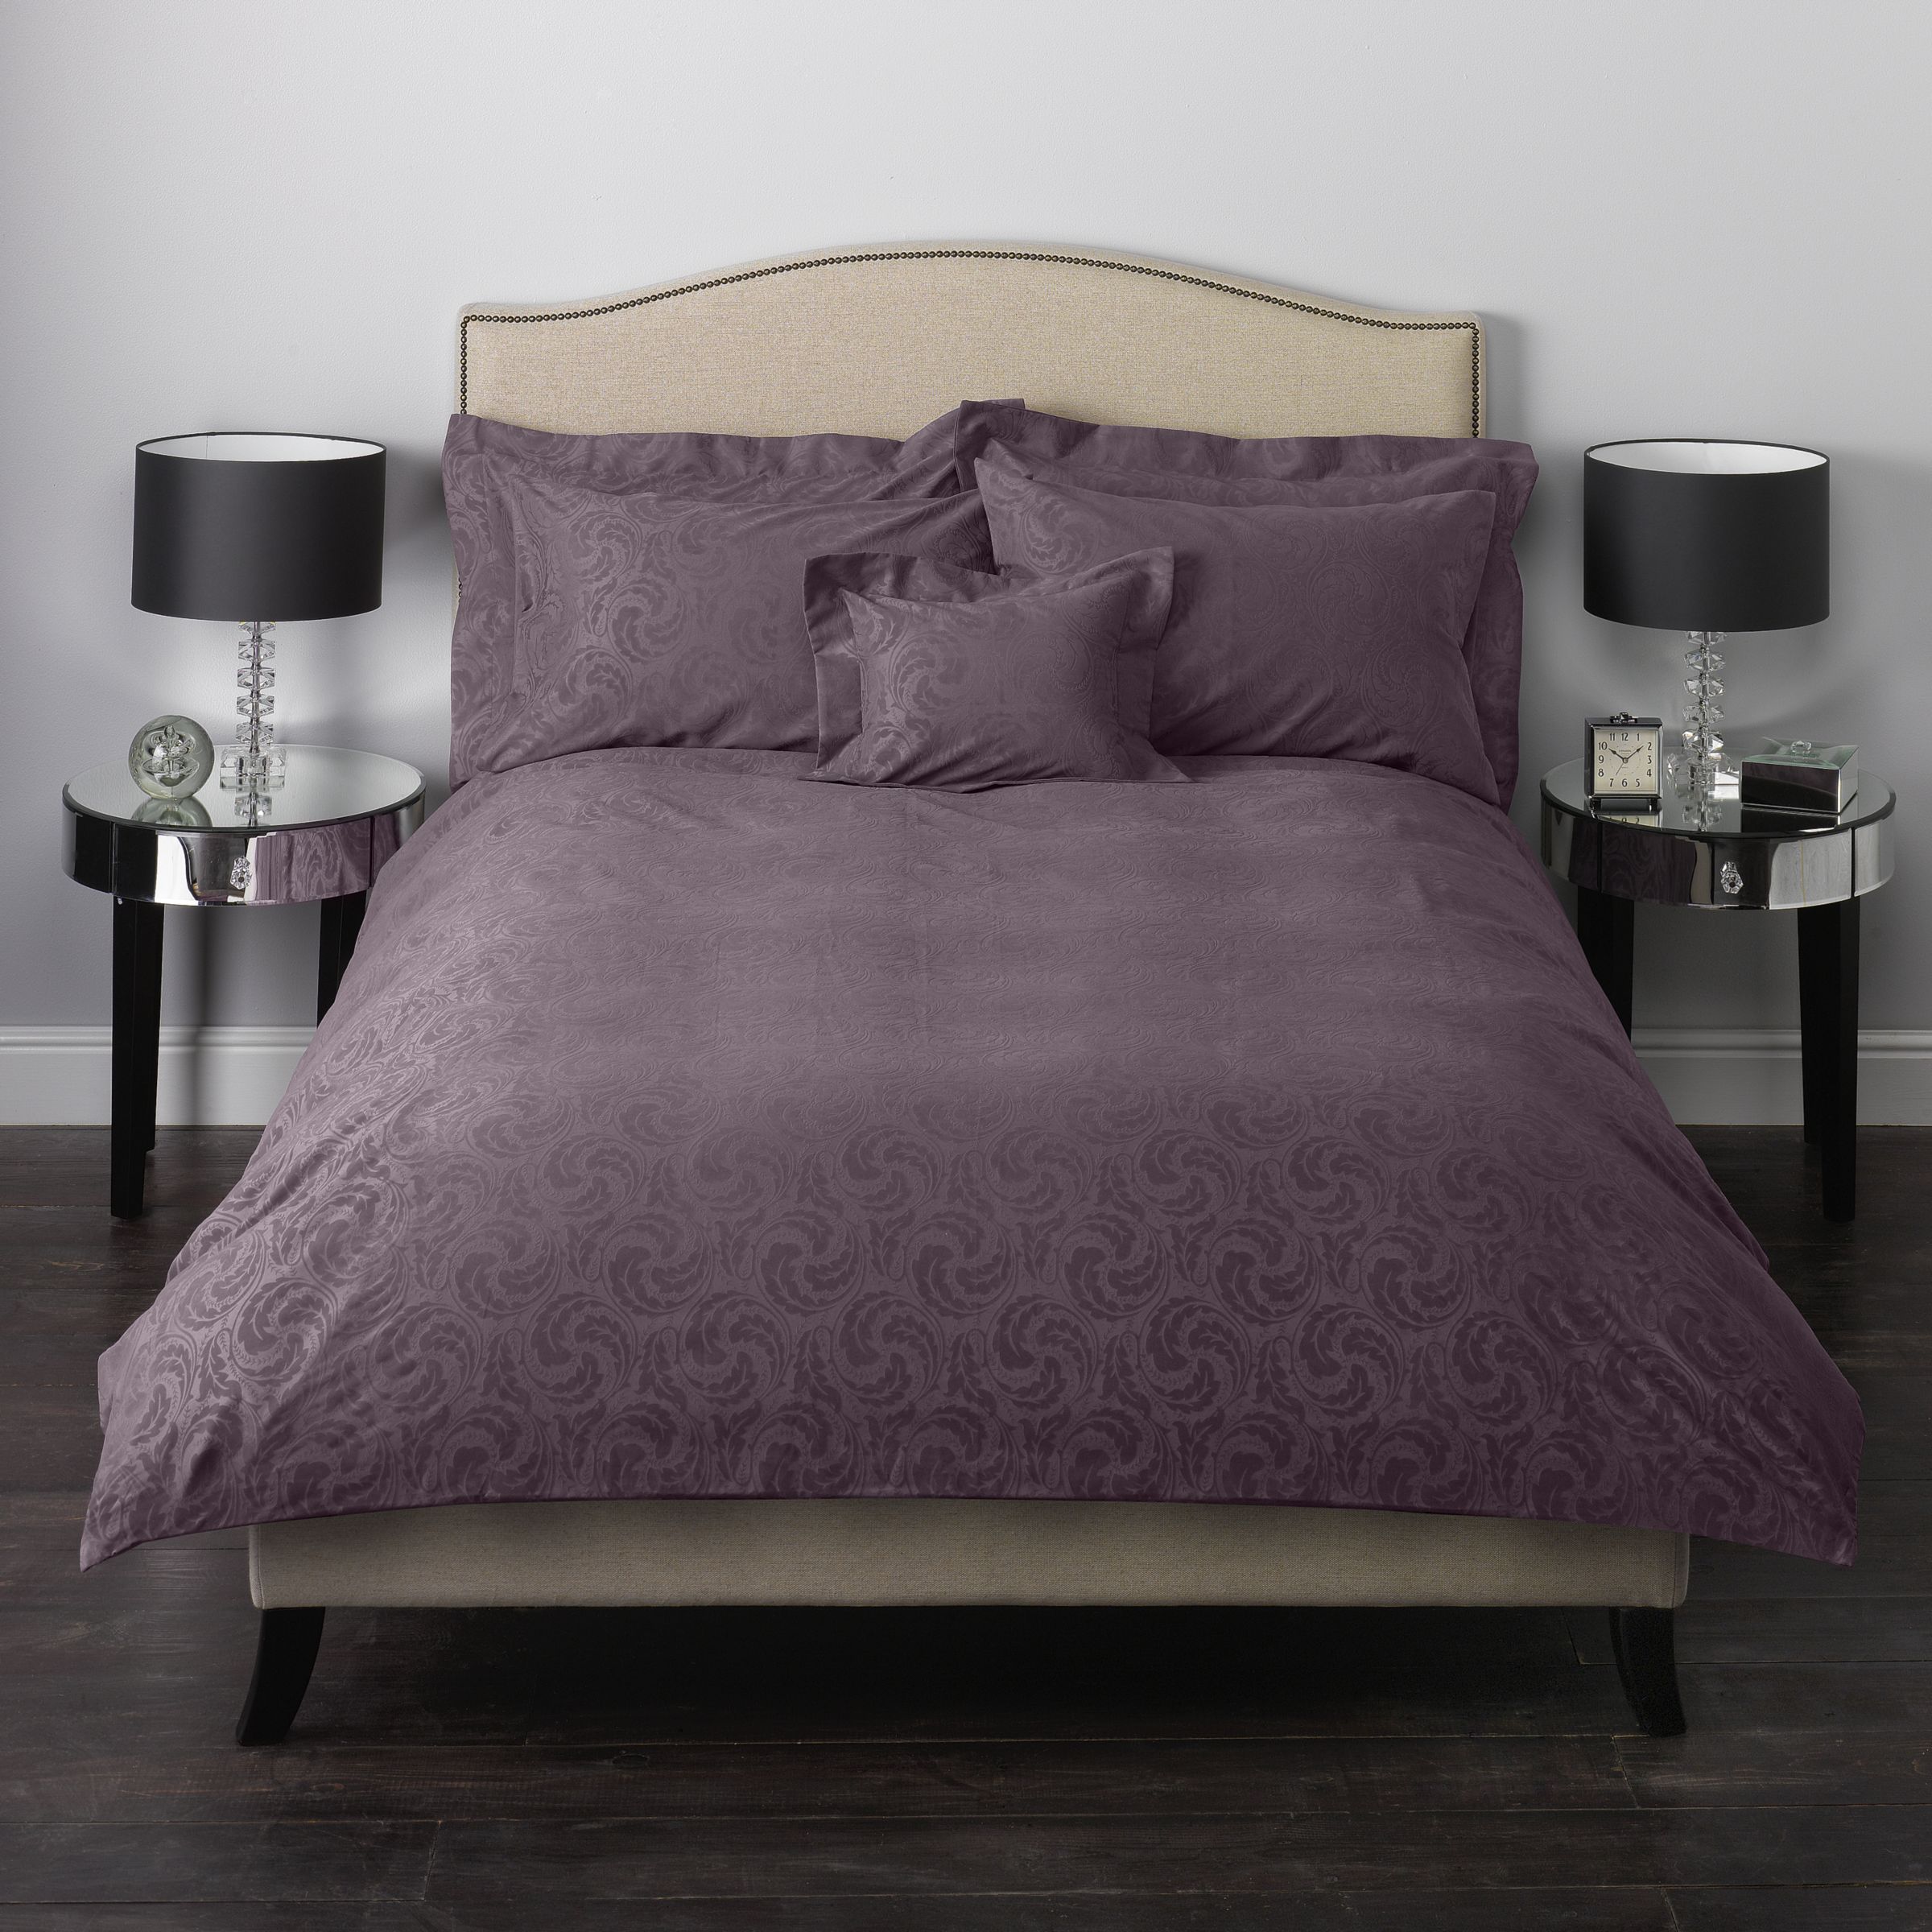 Rococo Duvet Covers, Amethyst, size: